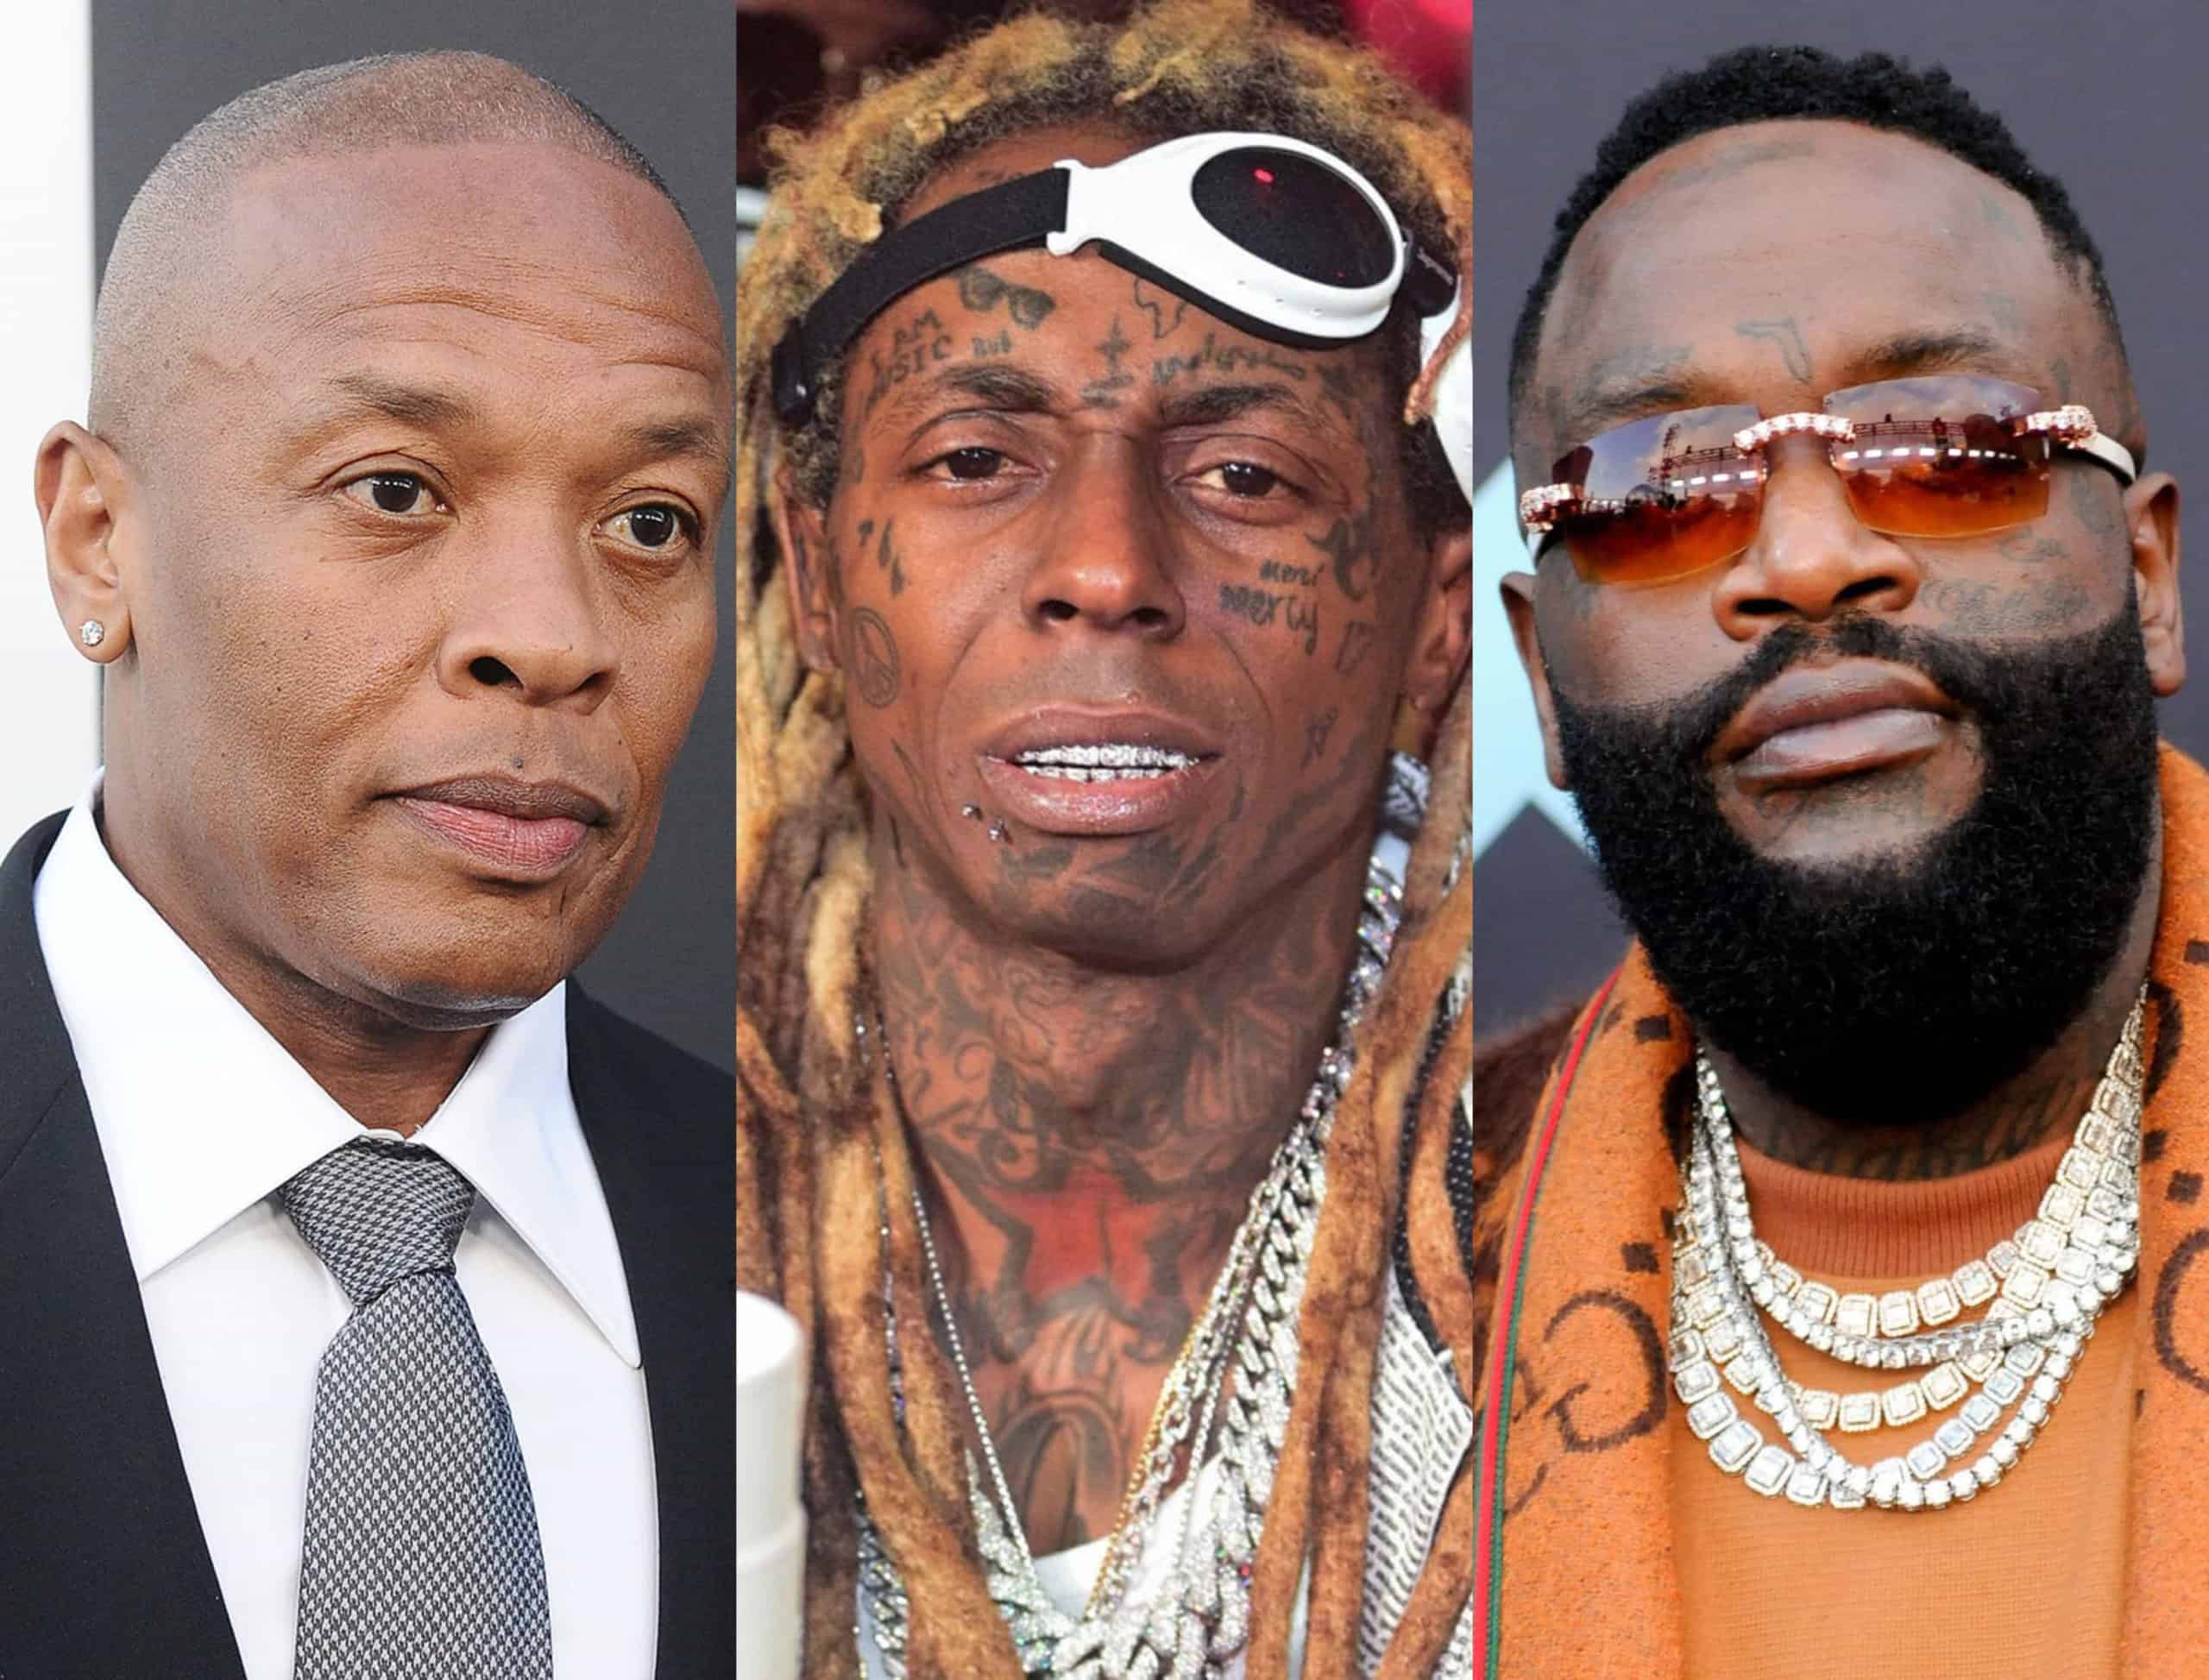 Dr. Dre, Lil Wayne & More To Feature On Rick Ross' New Album